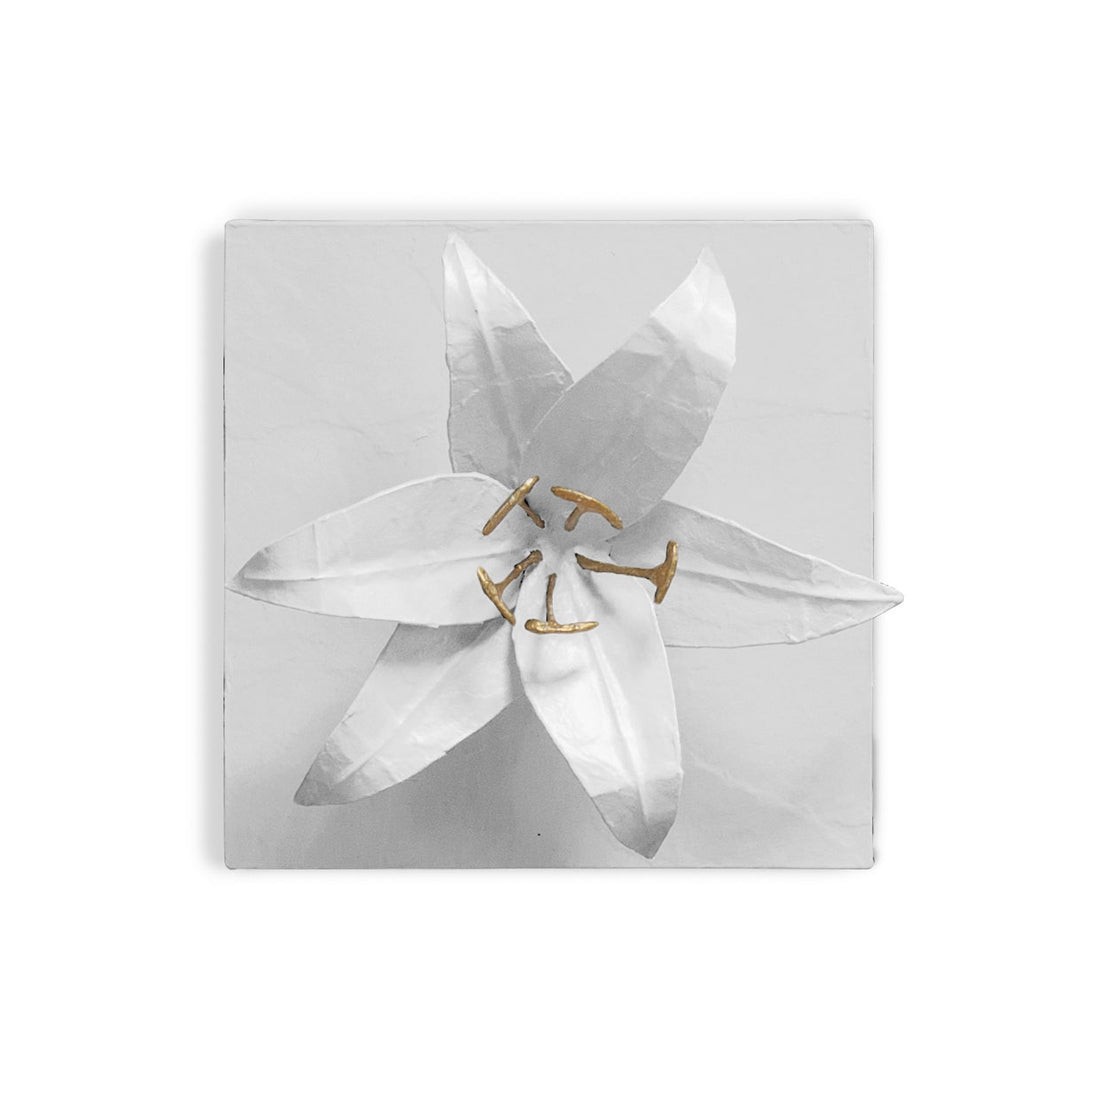 Lily Flower Wall Tile, handmade in Mexico